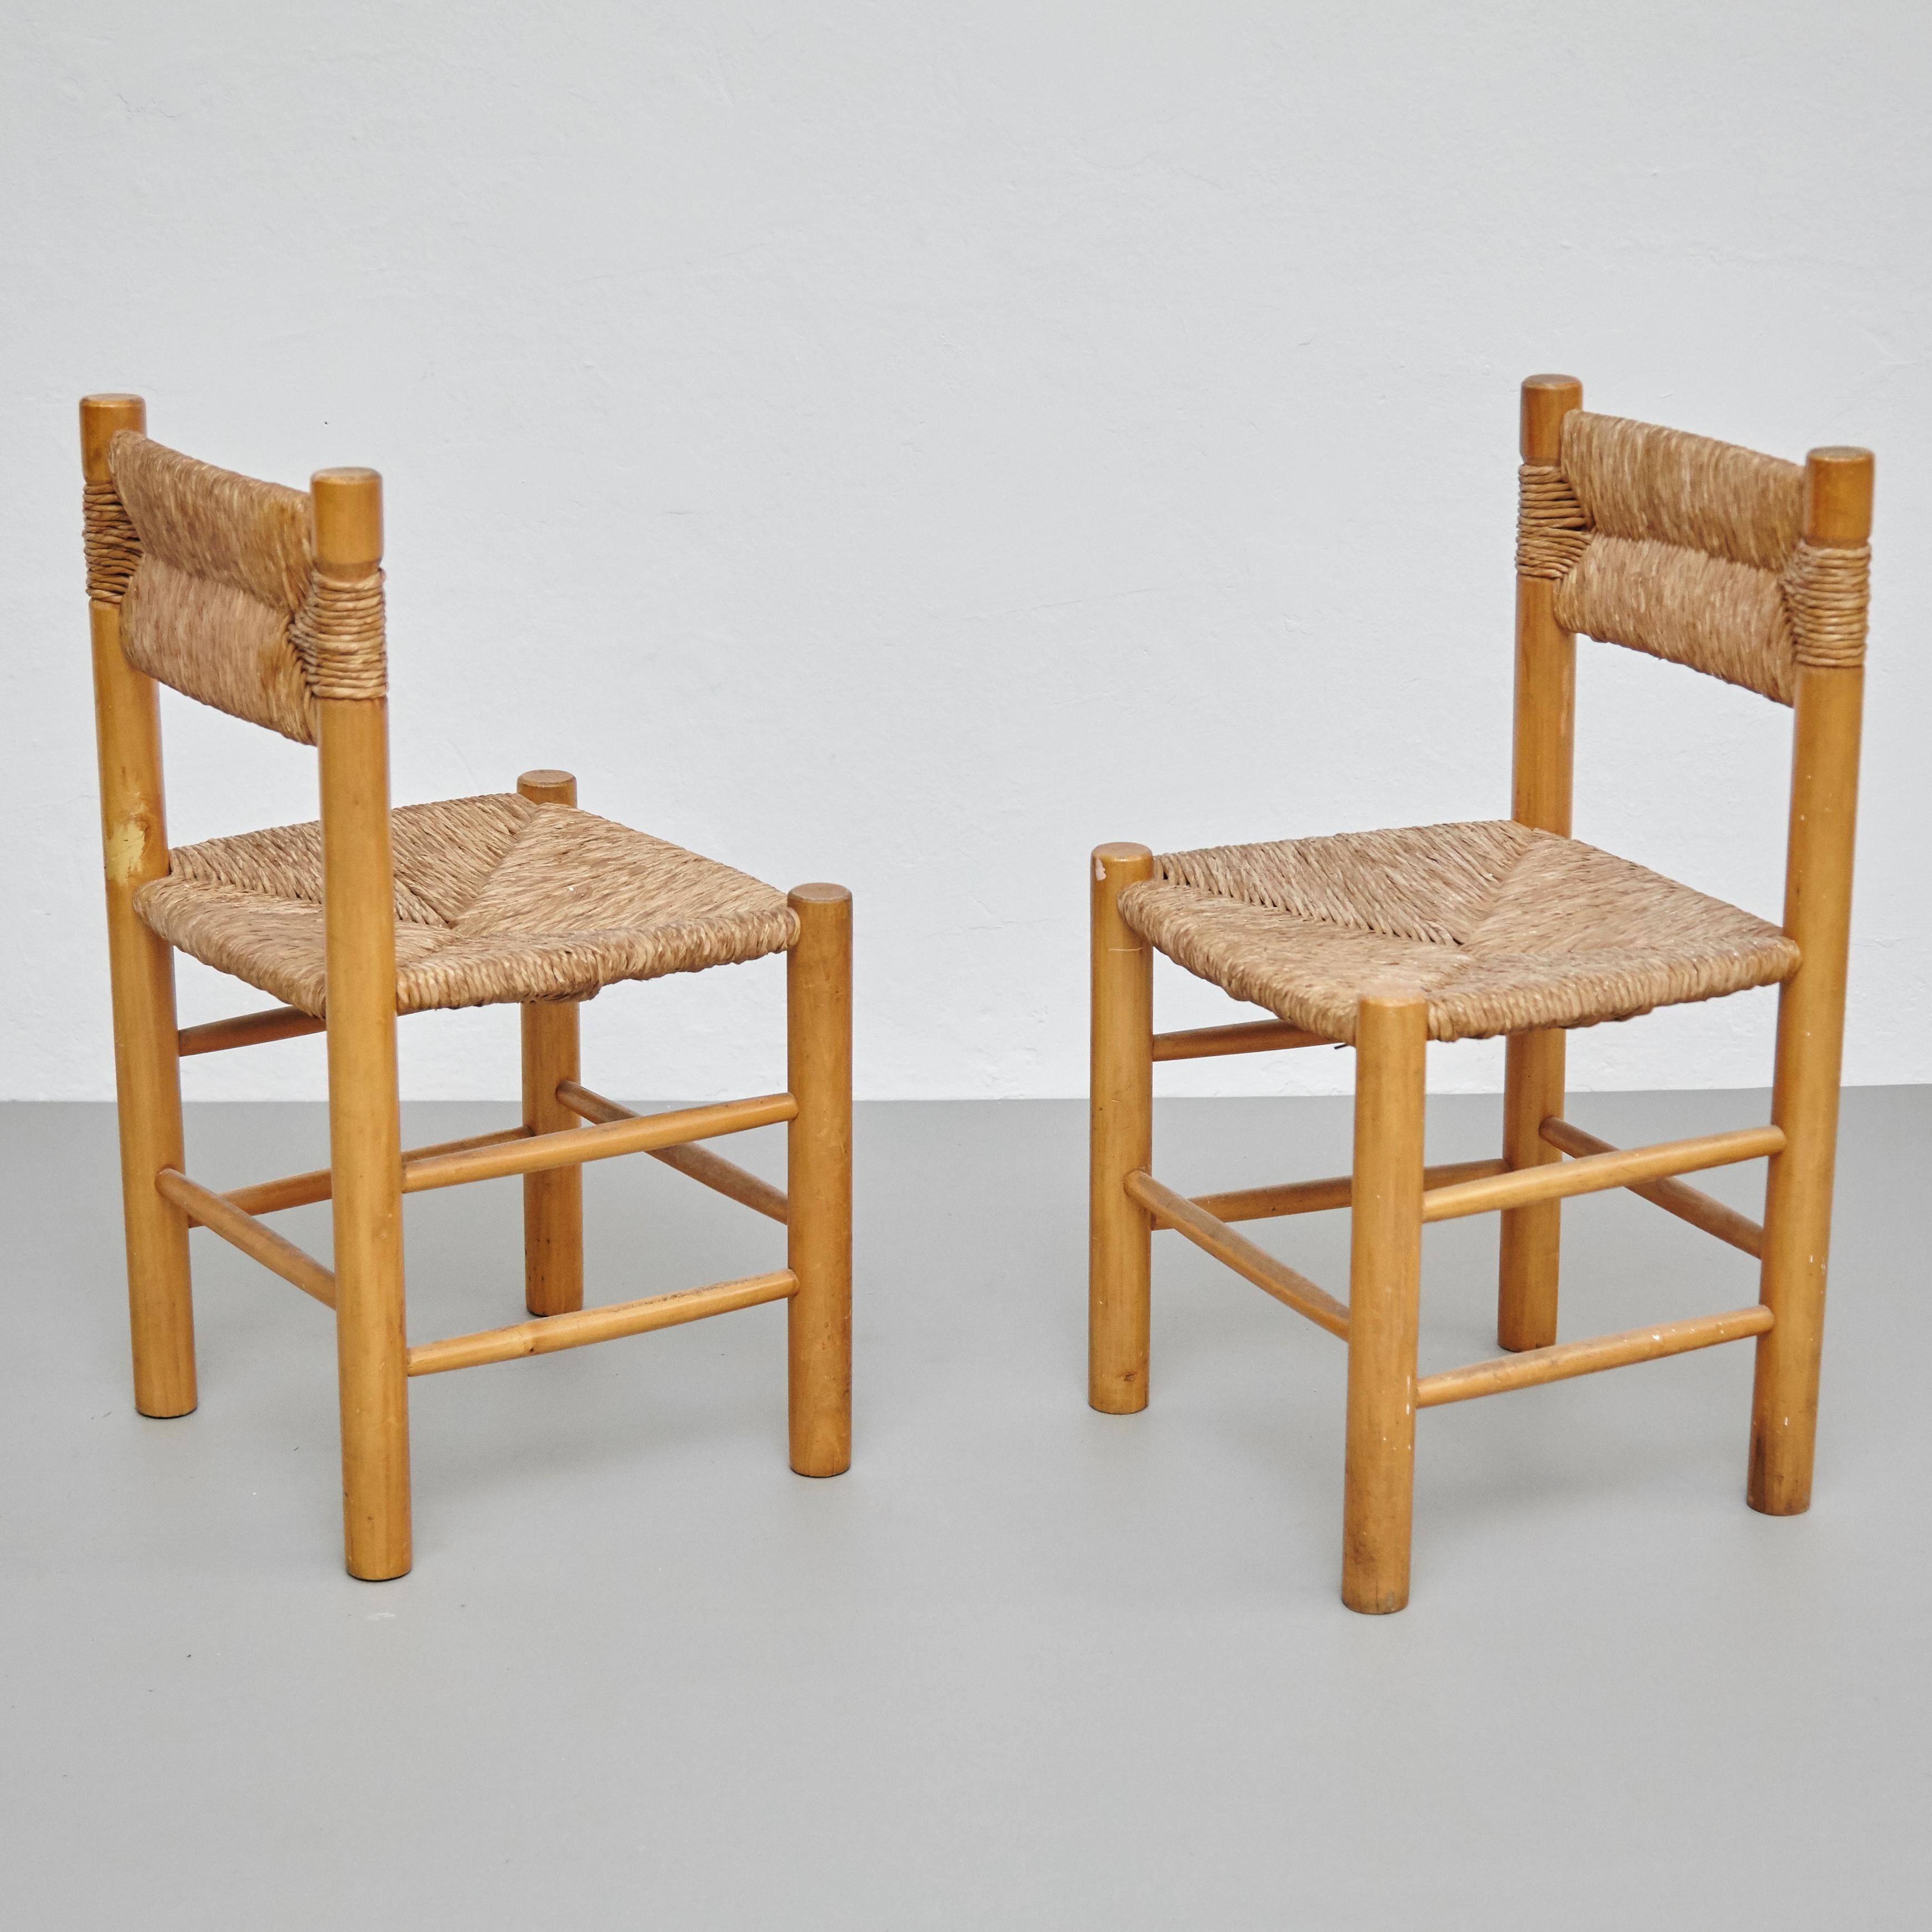 Set of 2 Mid-Century Modern wood rattan French chairs, circa 1950.
By unknown manufacturer, France.

In original condition, with minor wear consistent with age and use, preserving a beautiful patina.

Materials:
Wood
Rattan

Dimensions:
D